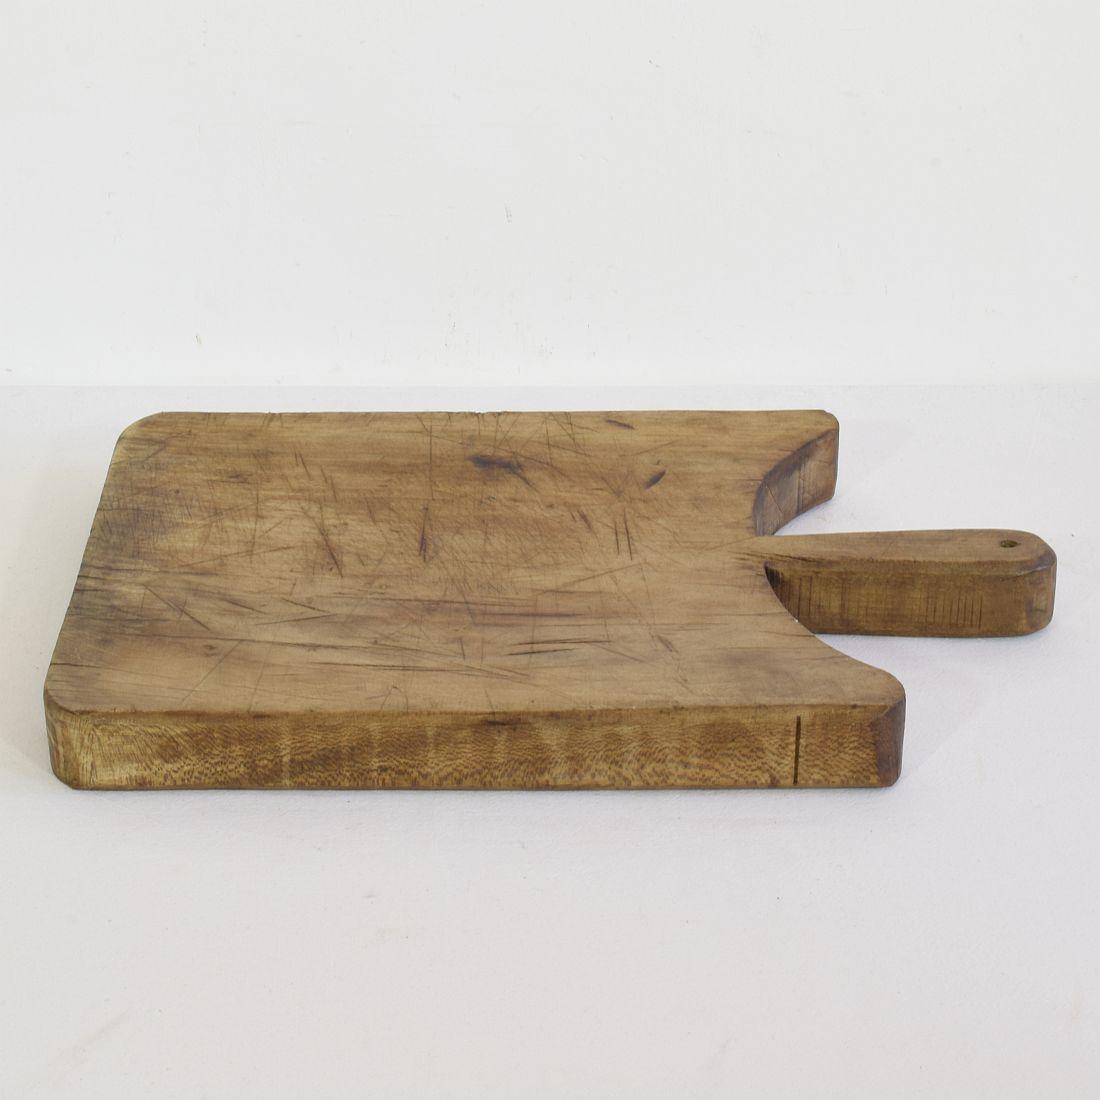 Hand-Carved French 19th Century, Wooden Chopping or Cutting Board